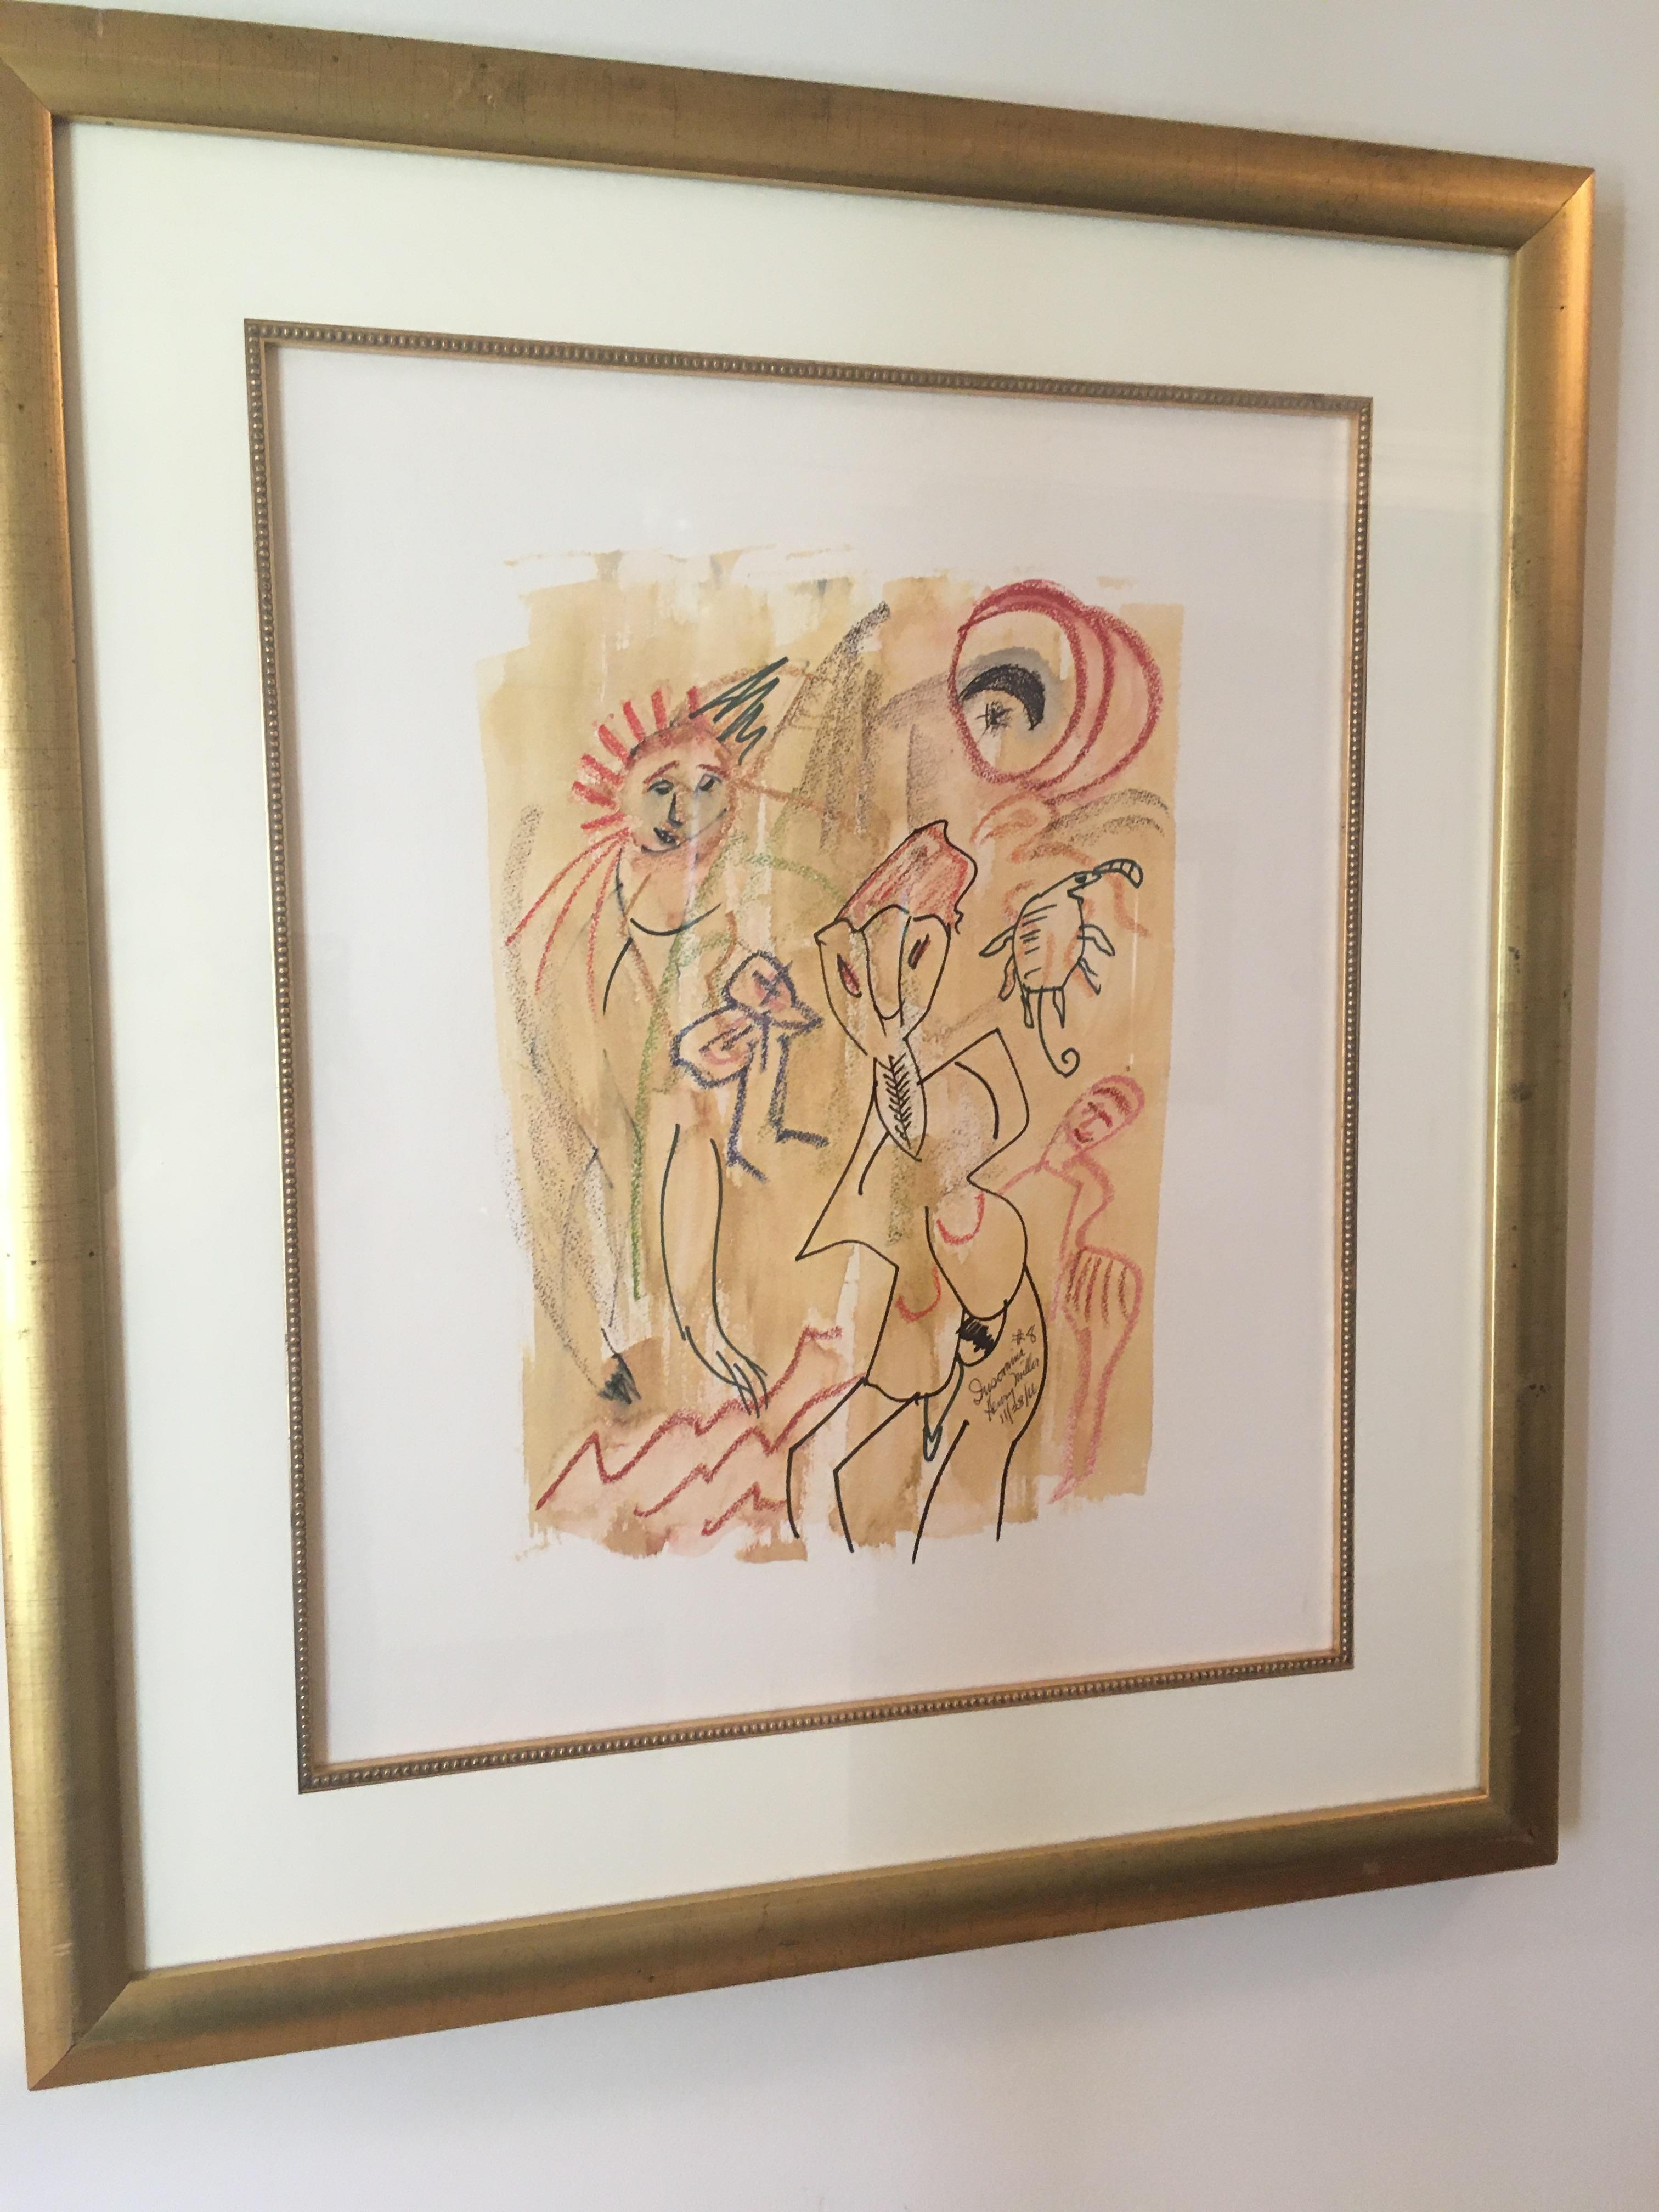 A signed and numbered serigraph by Henry Miller, from the 